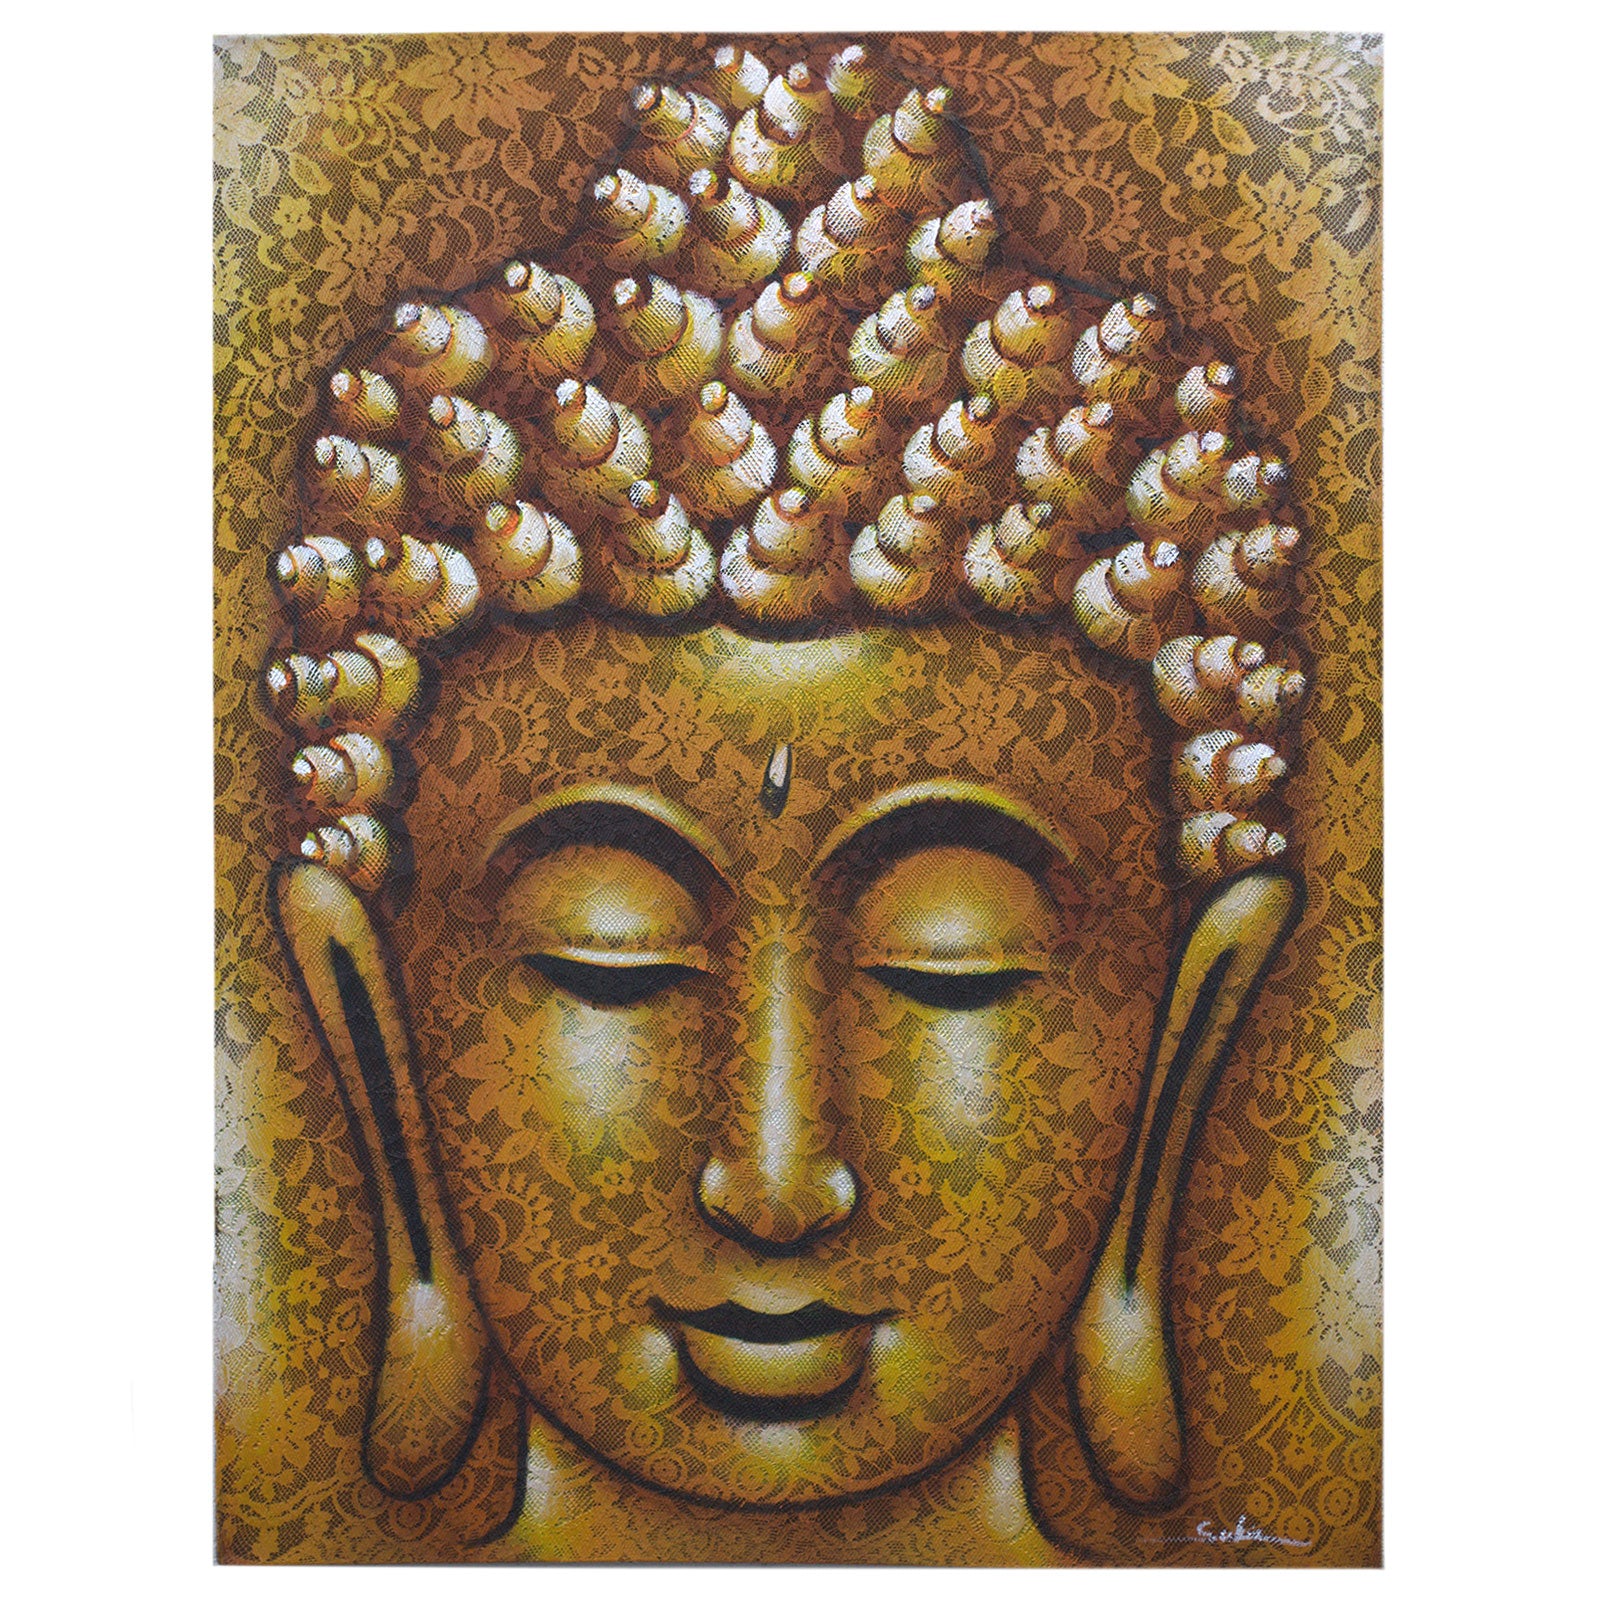 View Buddha Painting Gold Brocade Detail information